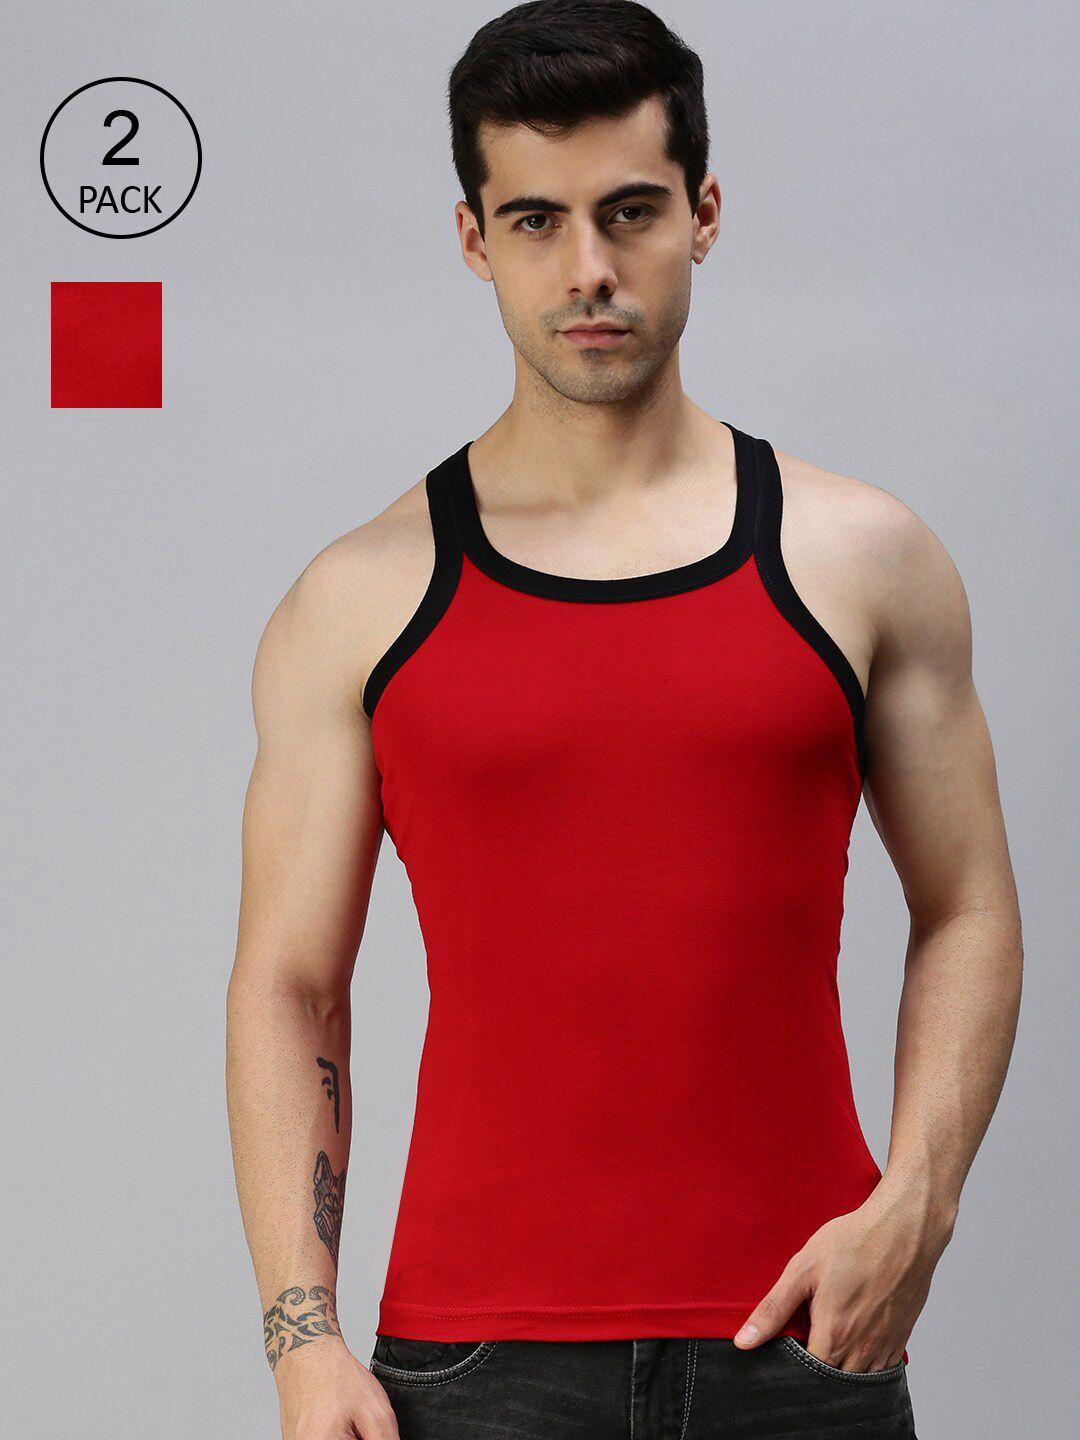 lux cozi men pack of 2 red solid organic cotton innerwear vests